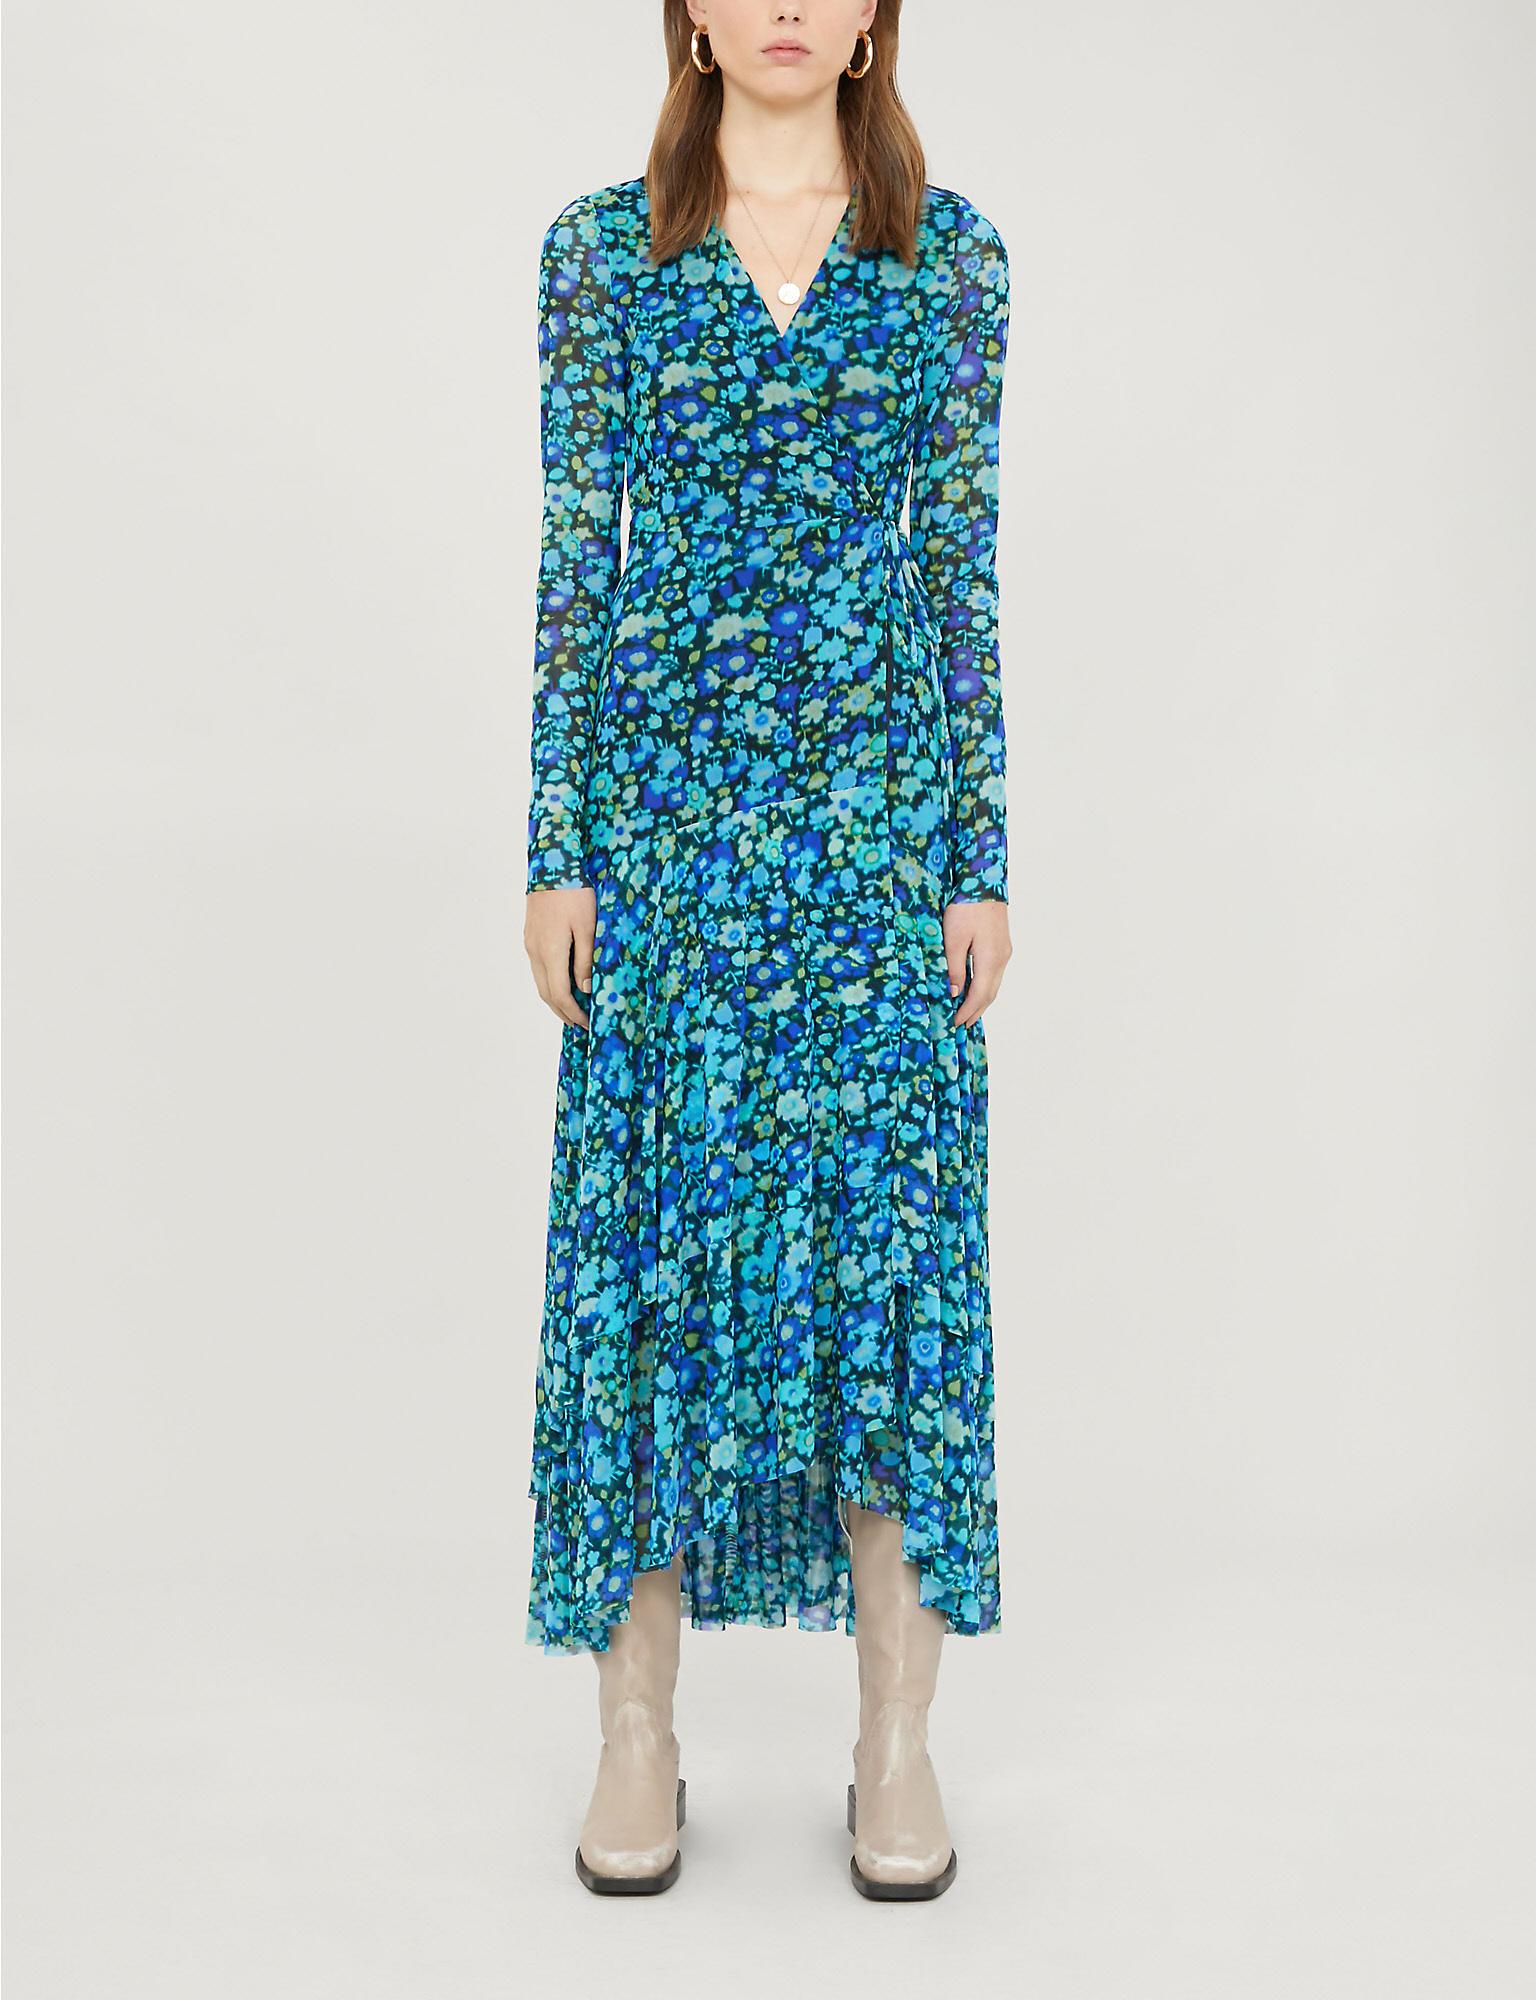 Ganni Synthetic Floral Print Wrap Dress in Azure Blue (Blue) - Lyst